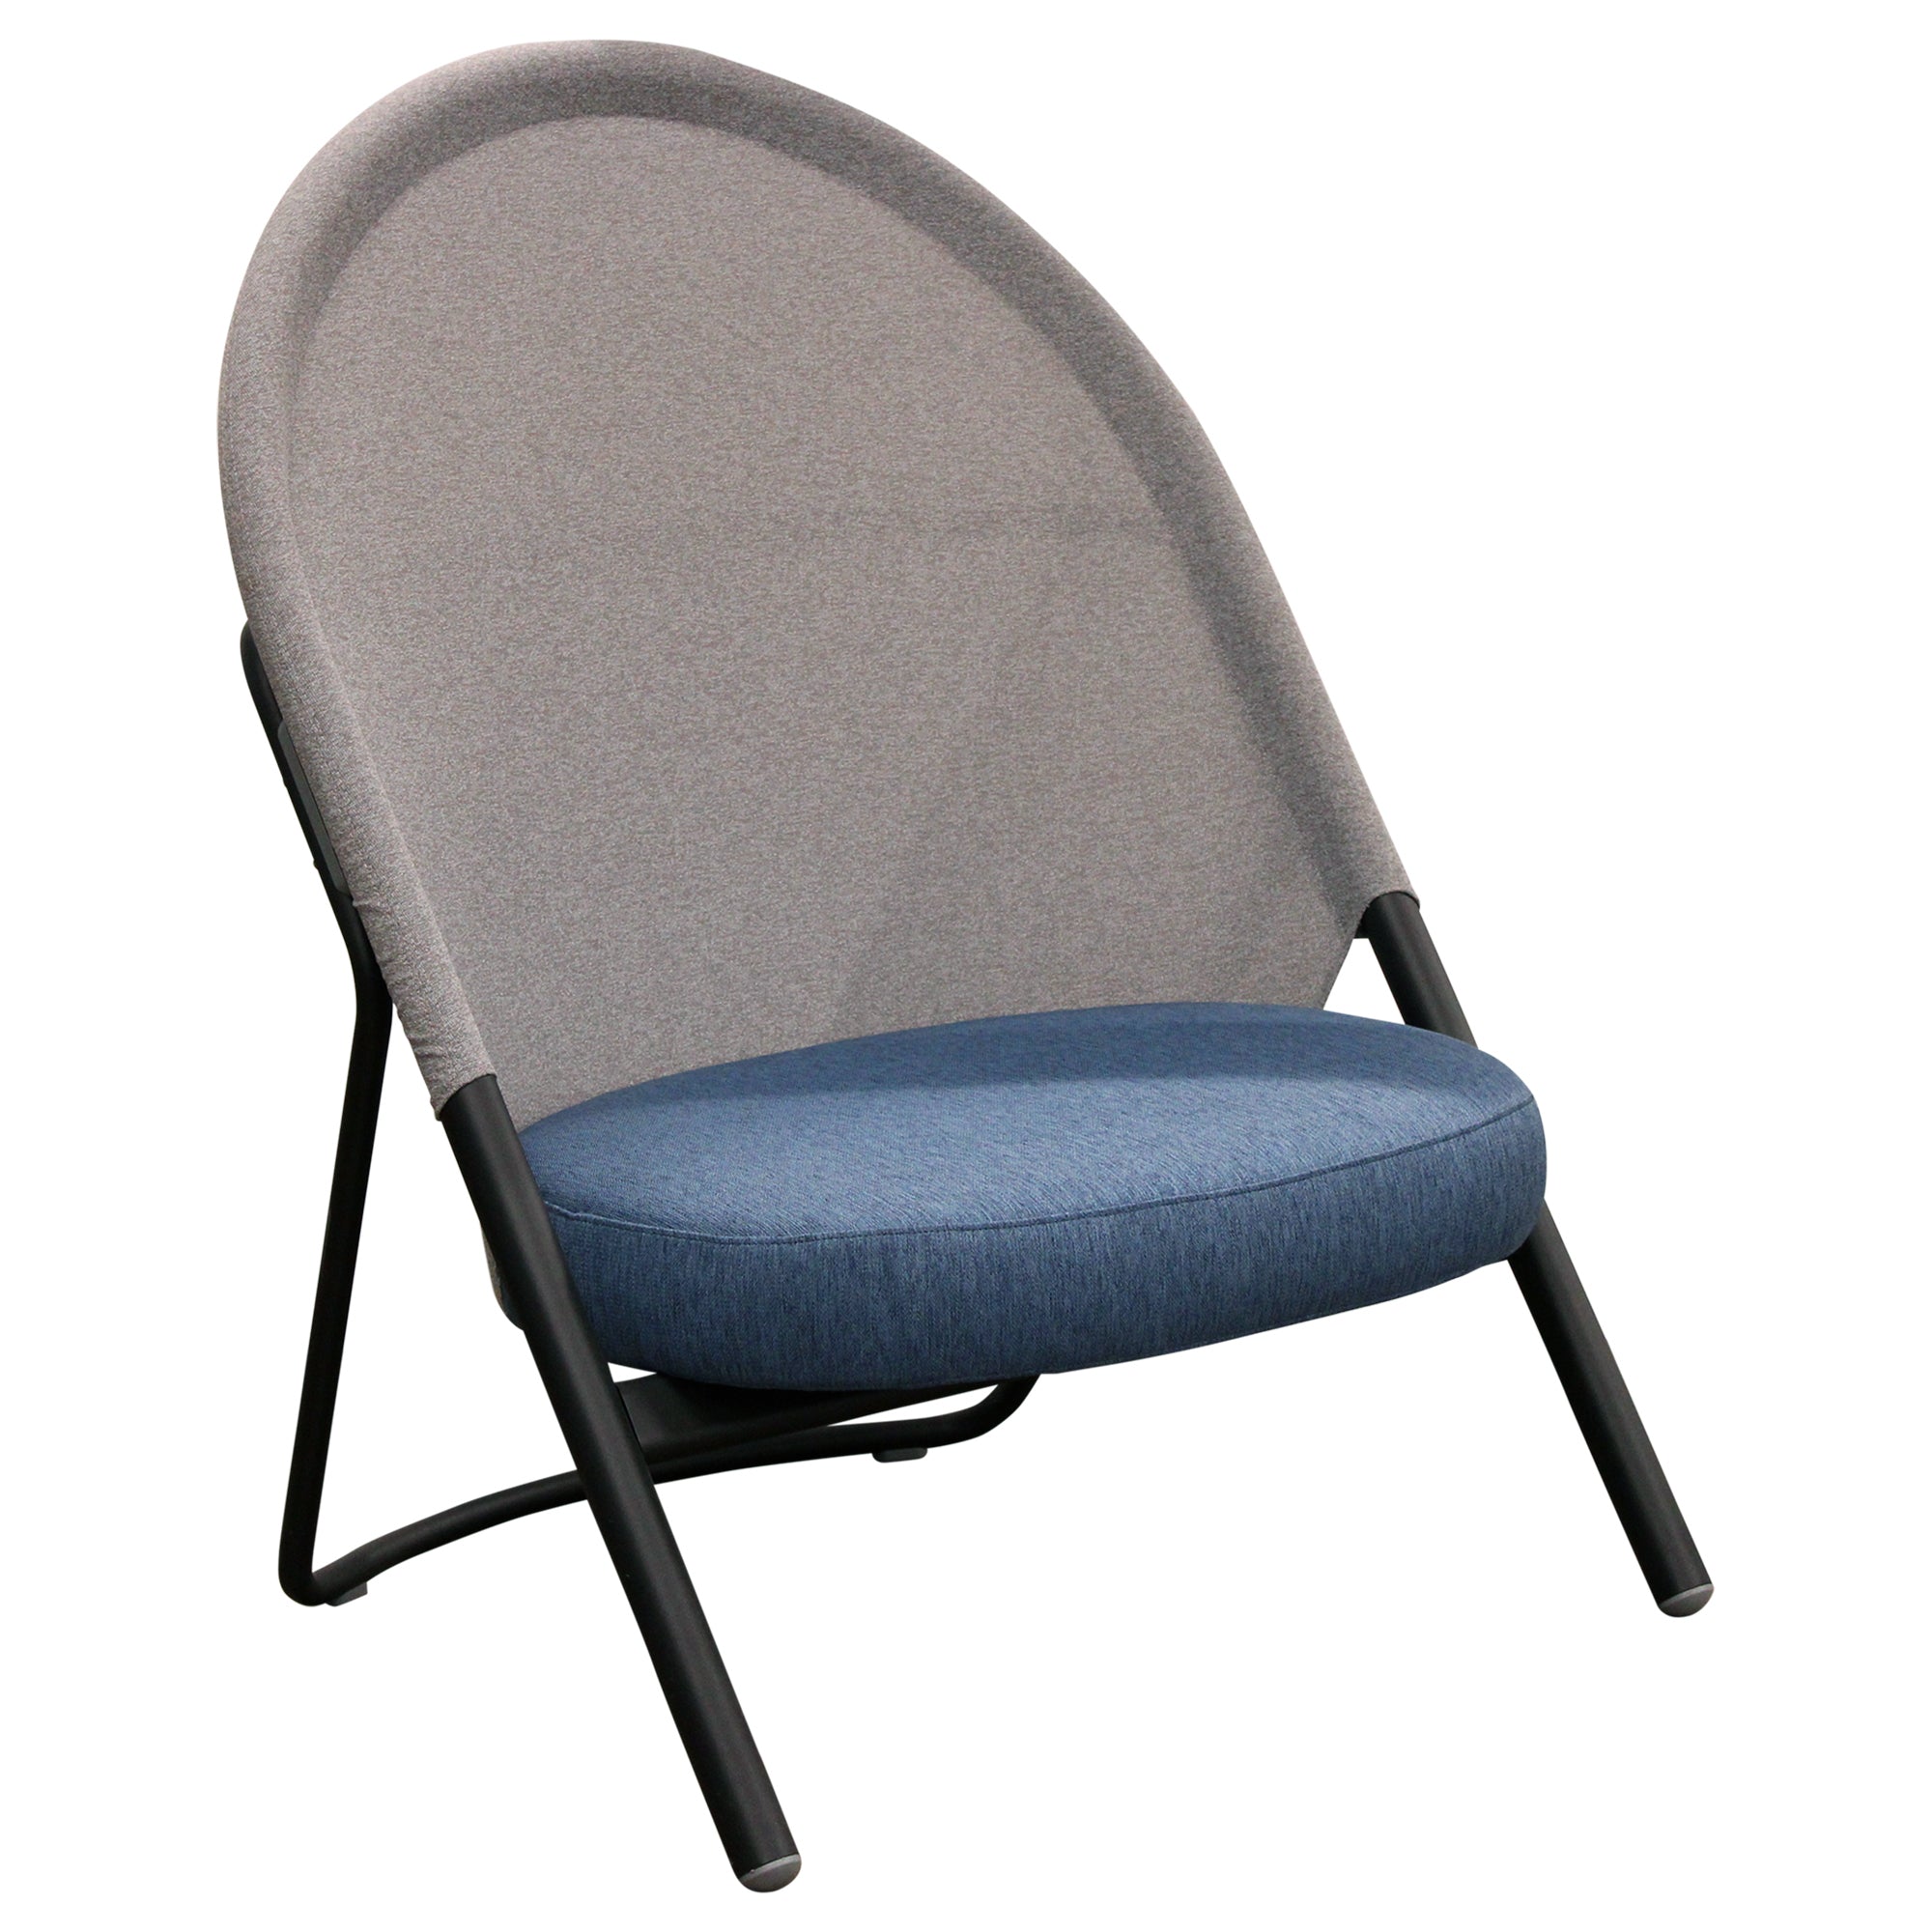 Teknion Routes Arc Lounge Chair, Blue - Preowned